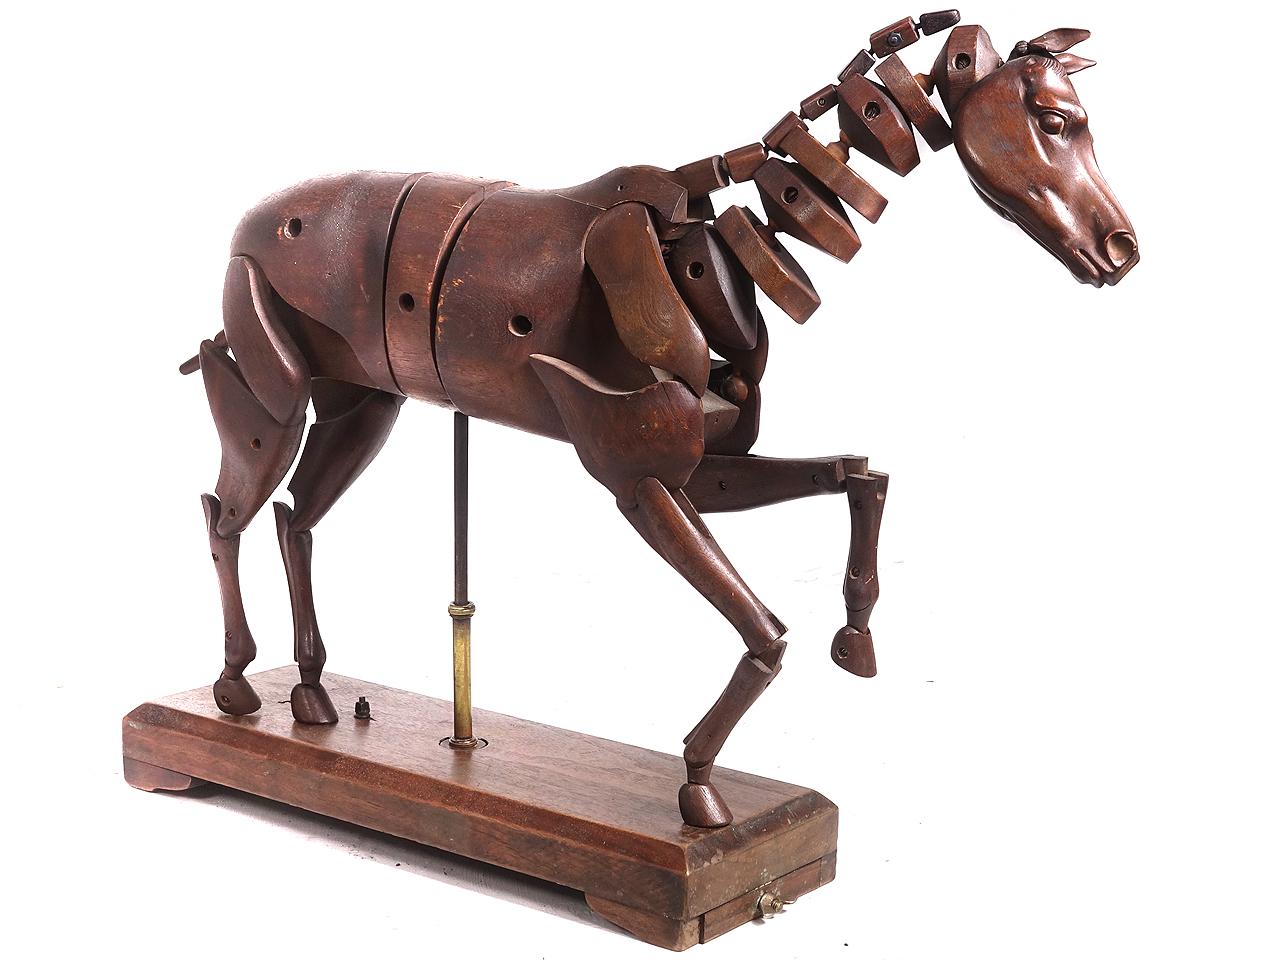 19th Century 1830 Articulated Artist's Horse Model and Case